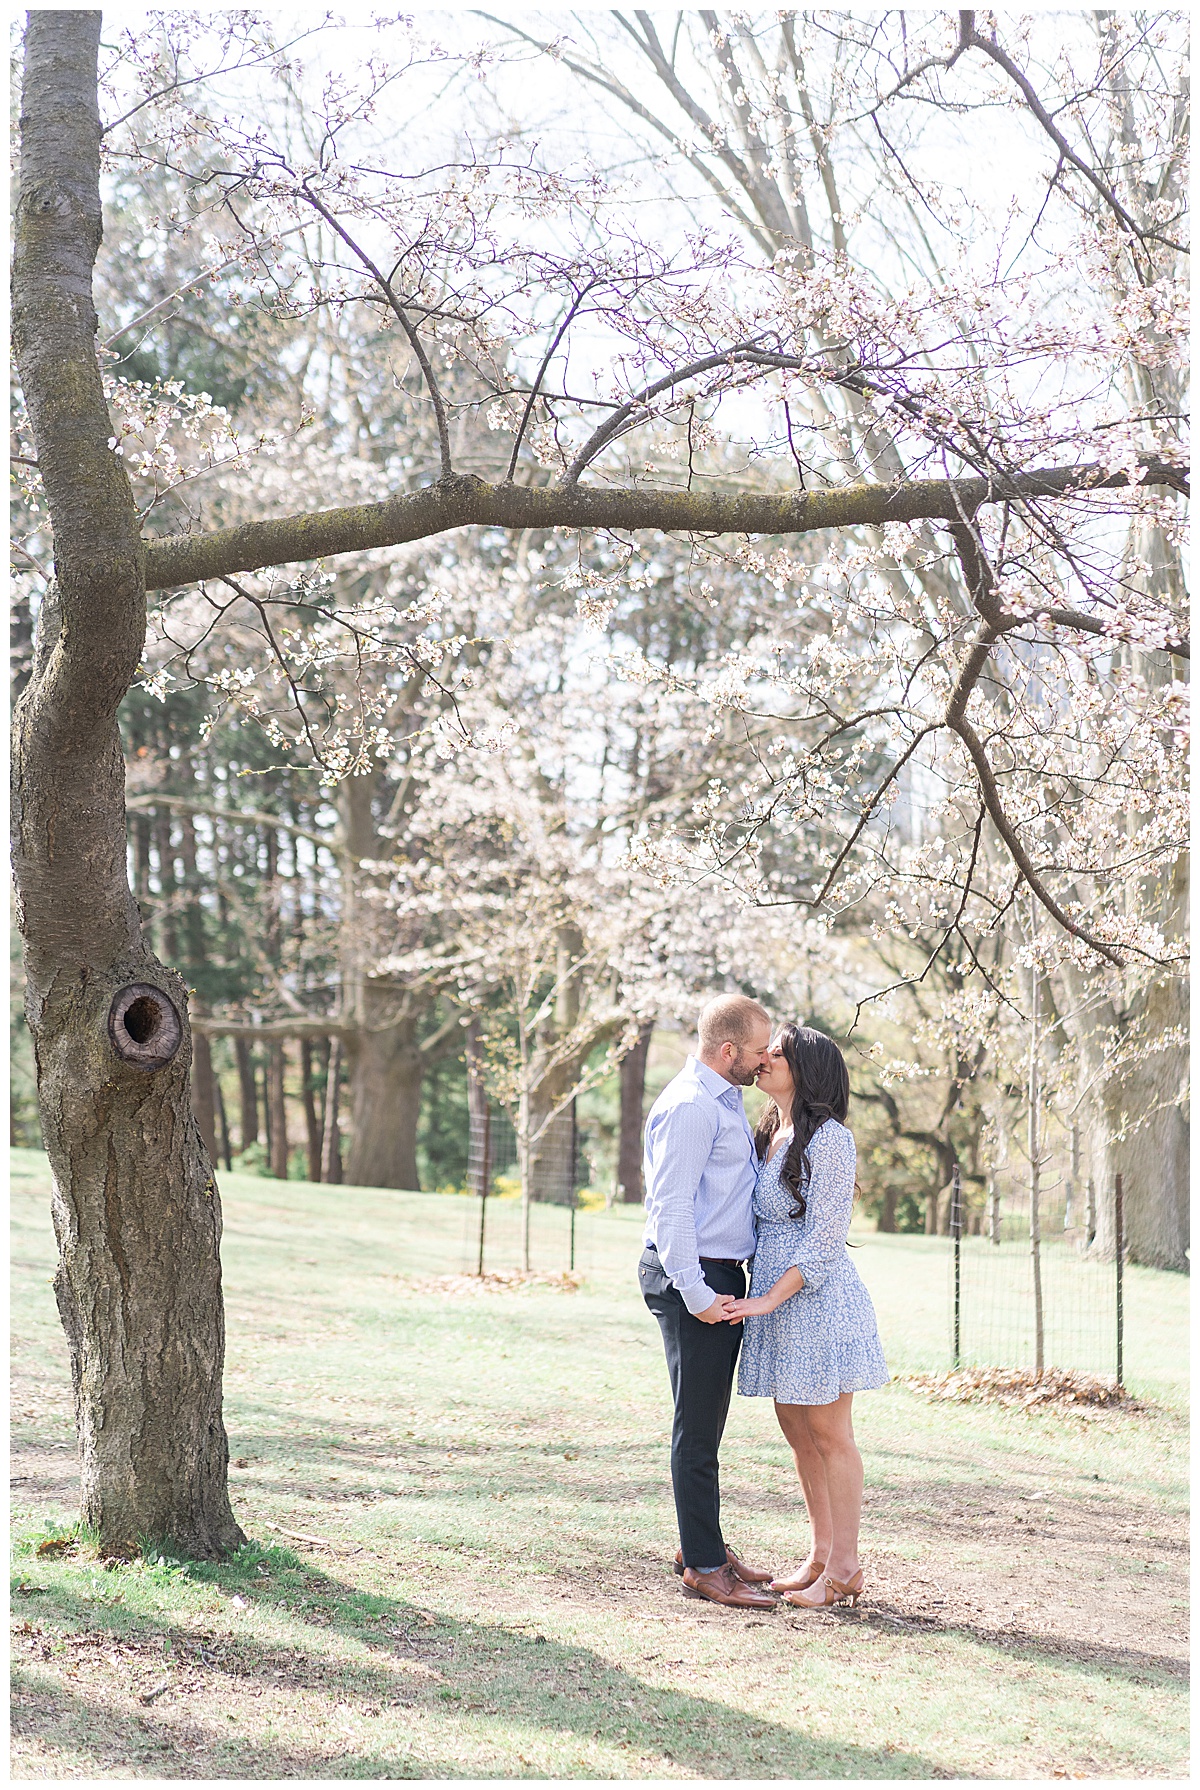 Man and woman kiss under cherry blossoms for Toronto Engagement Session